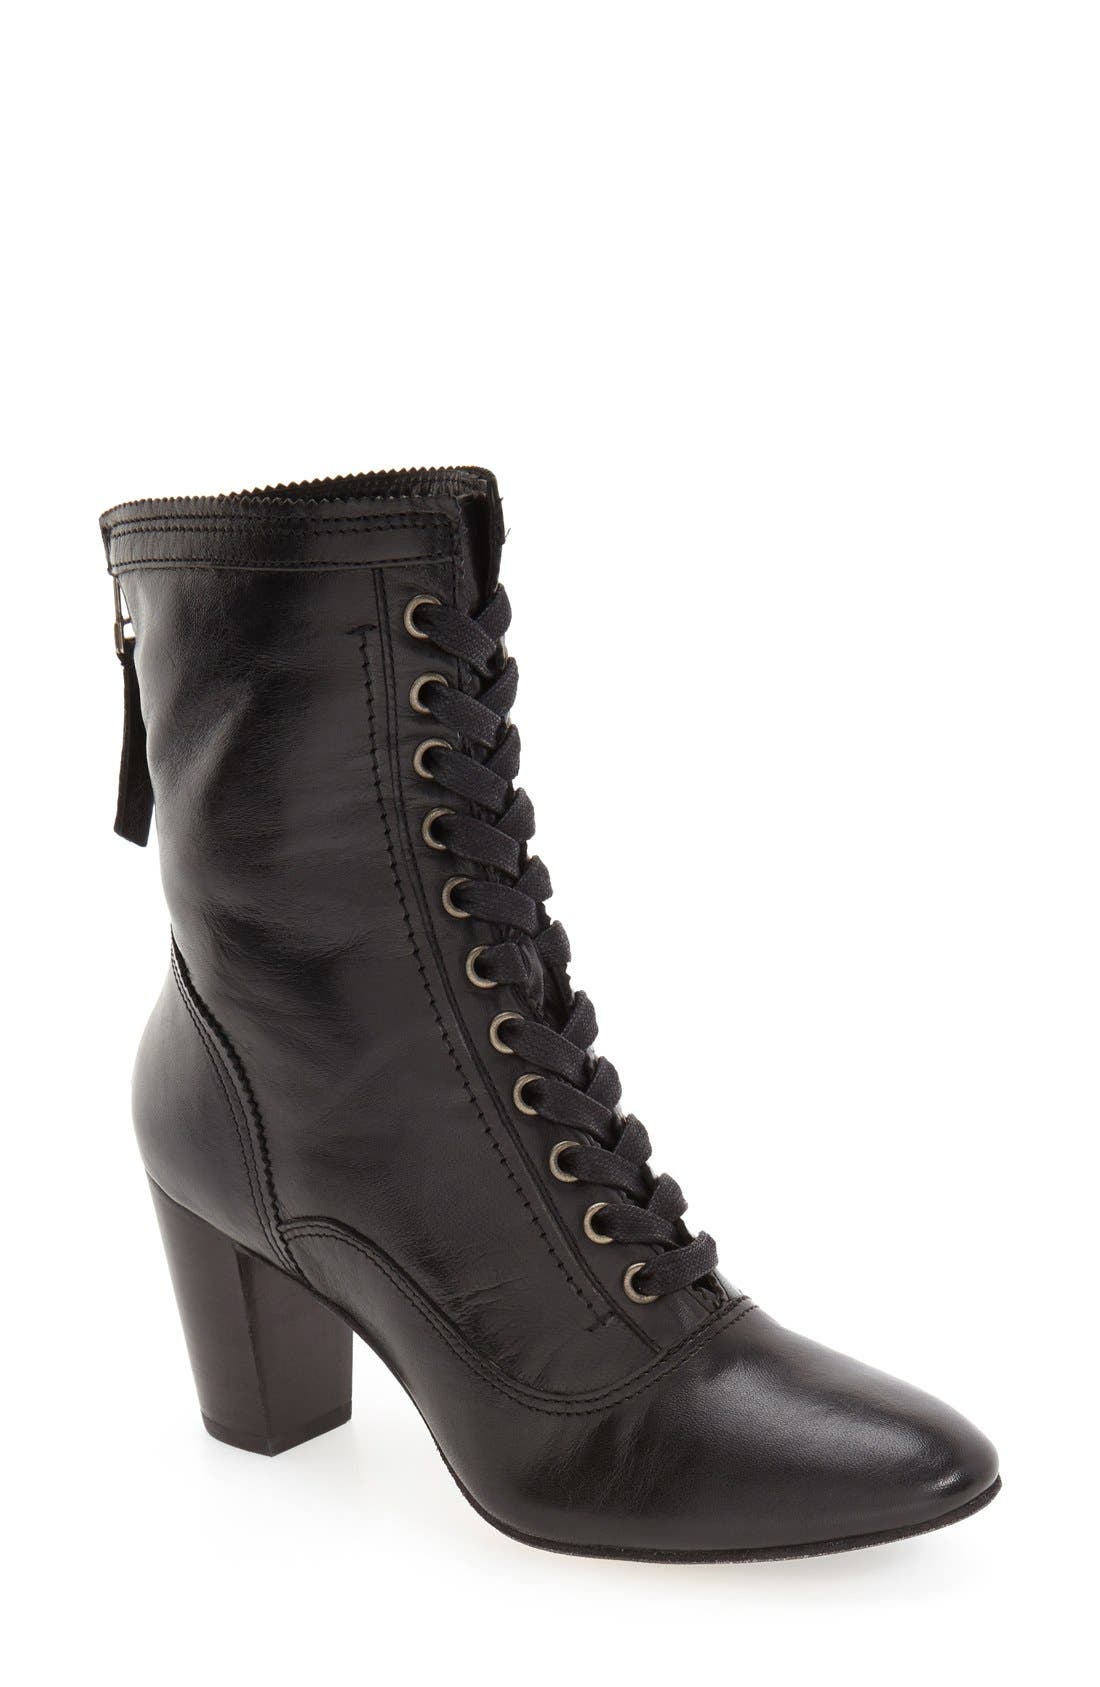 johnston and murphy womens boots